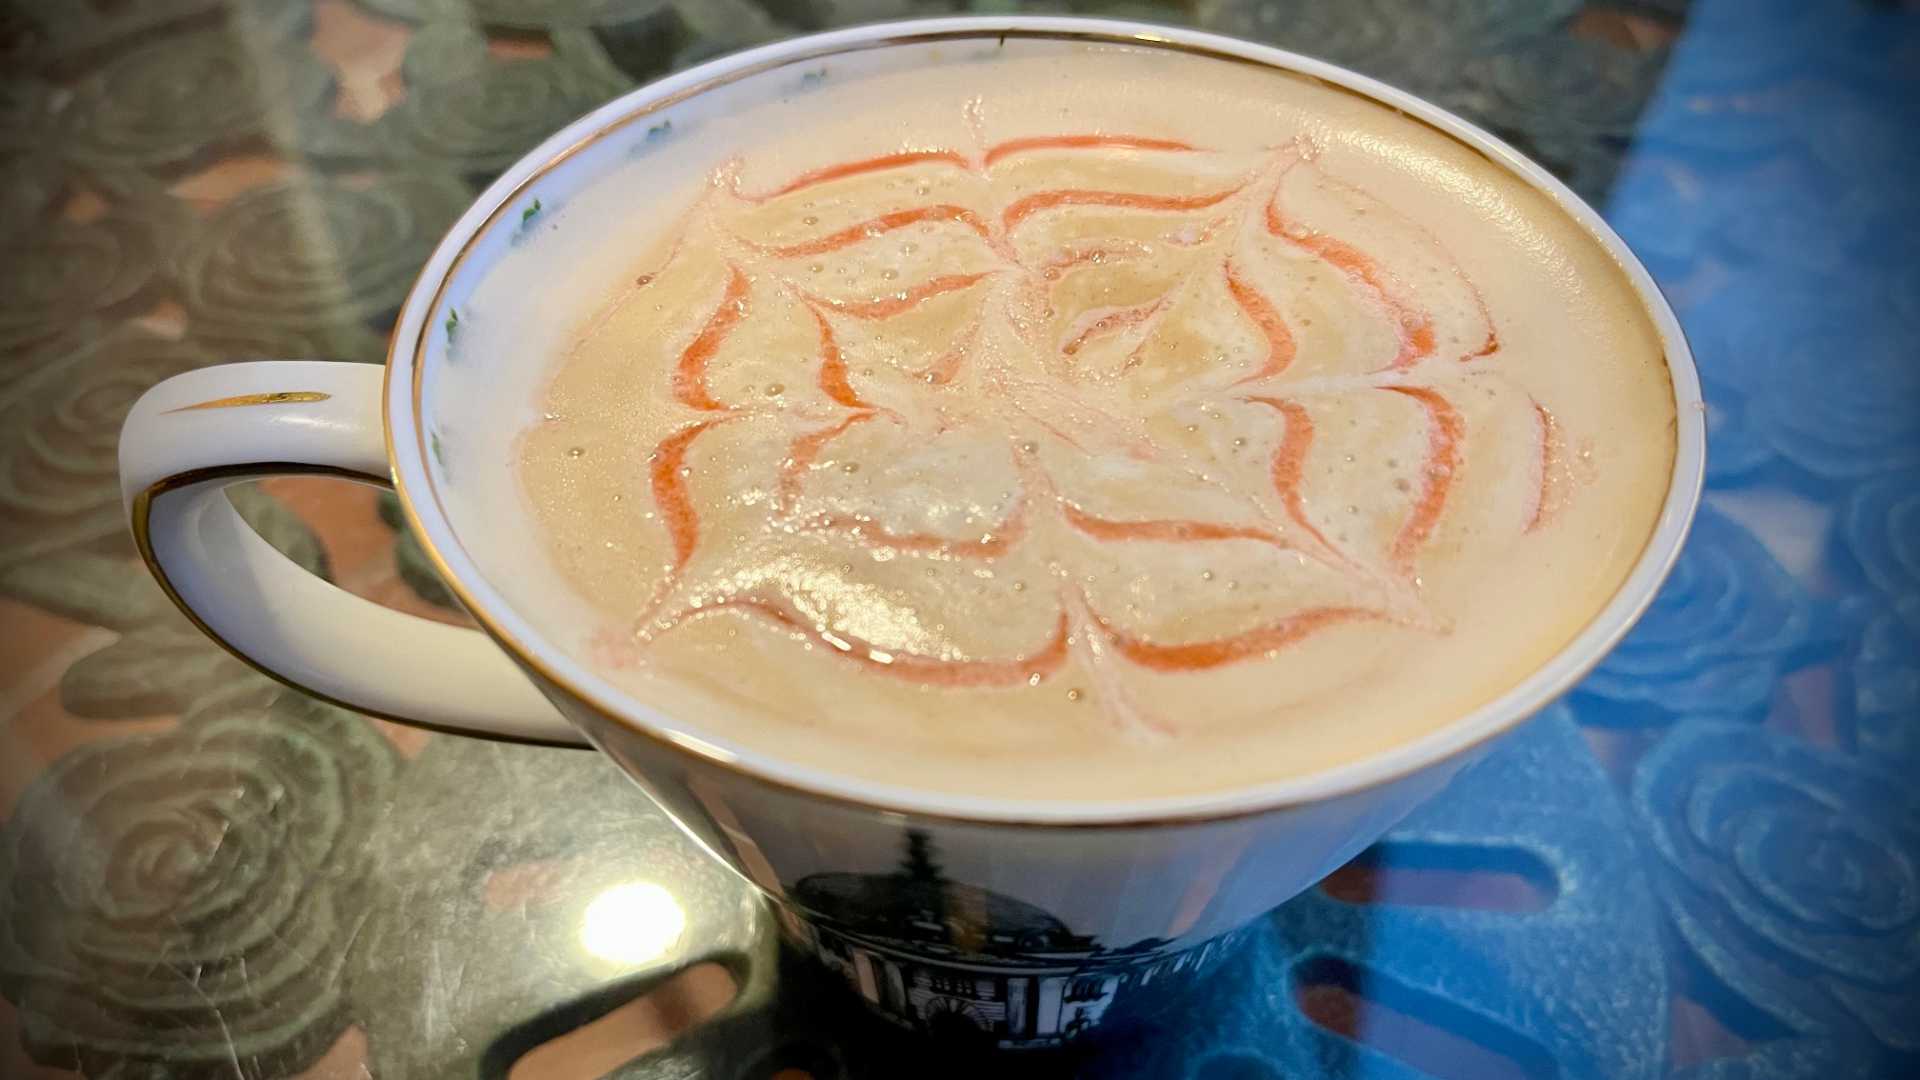 Close-up of a cup of coffee with an intricate pattern in the foam.